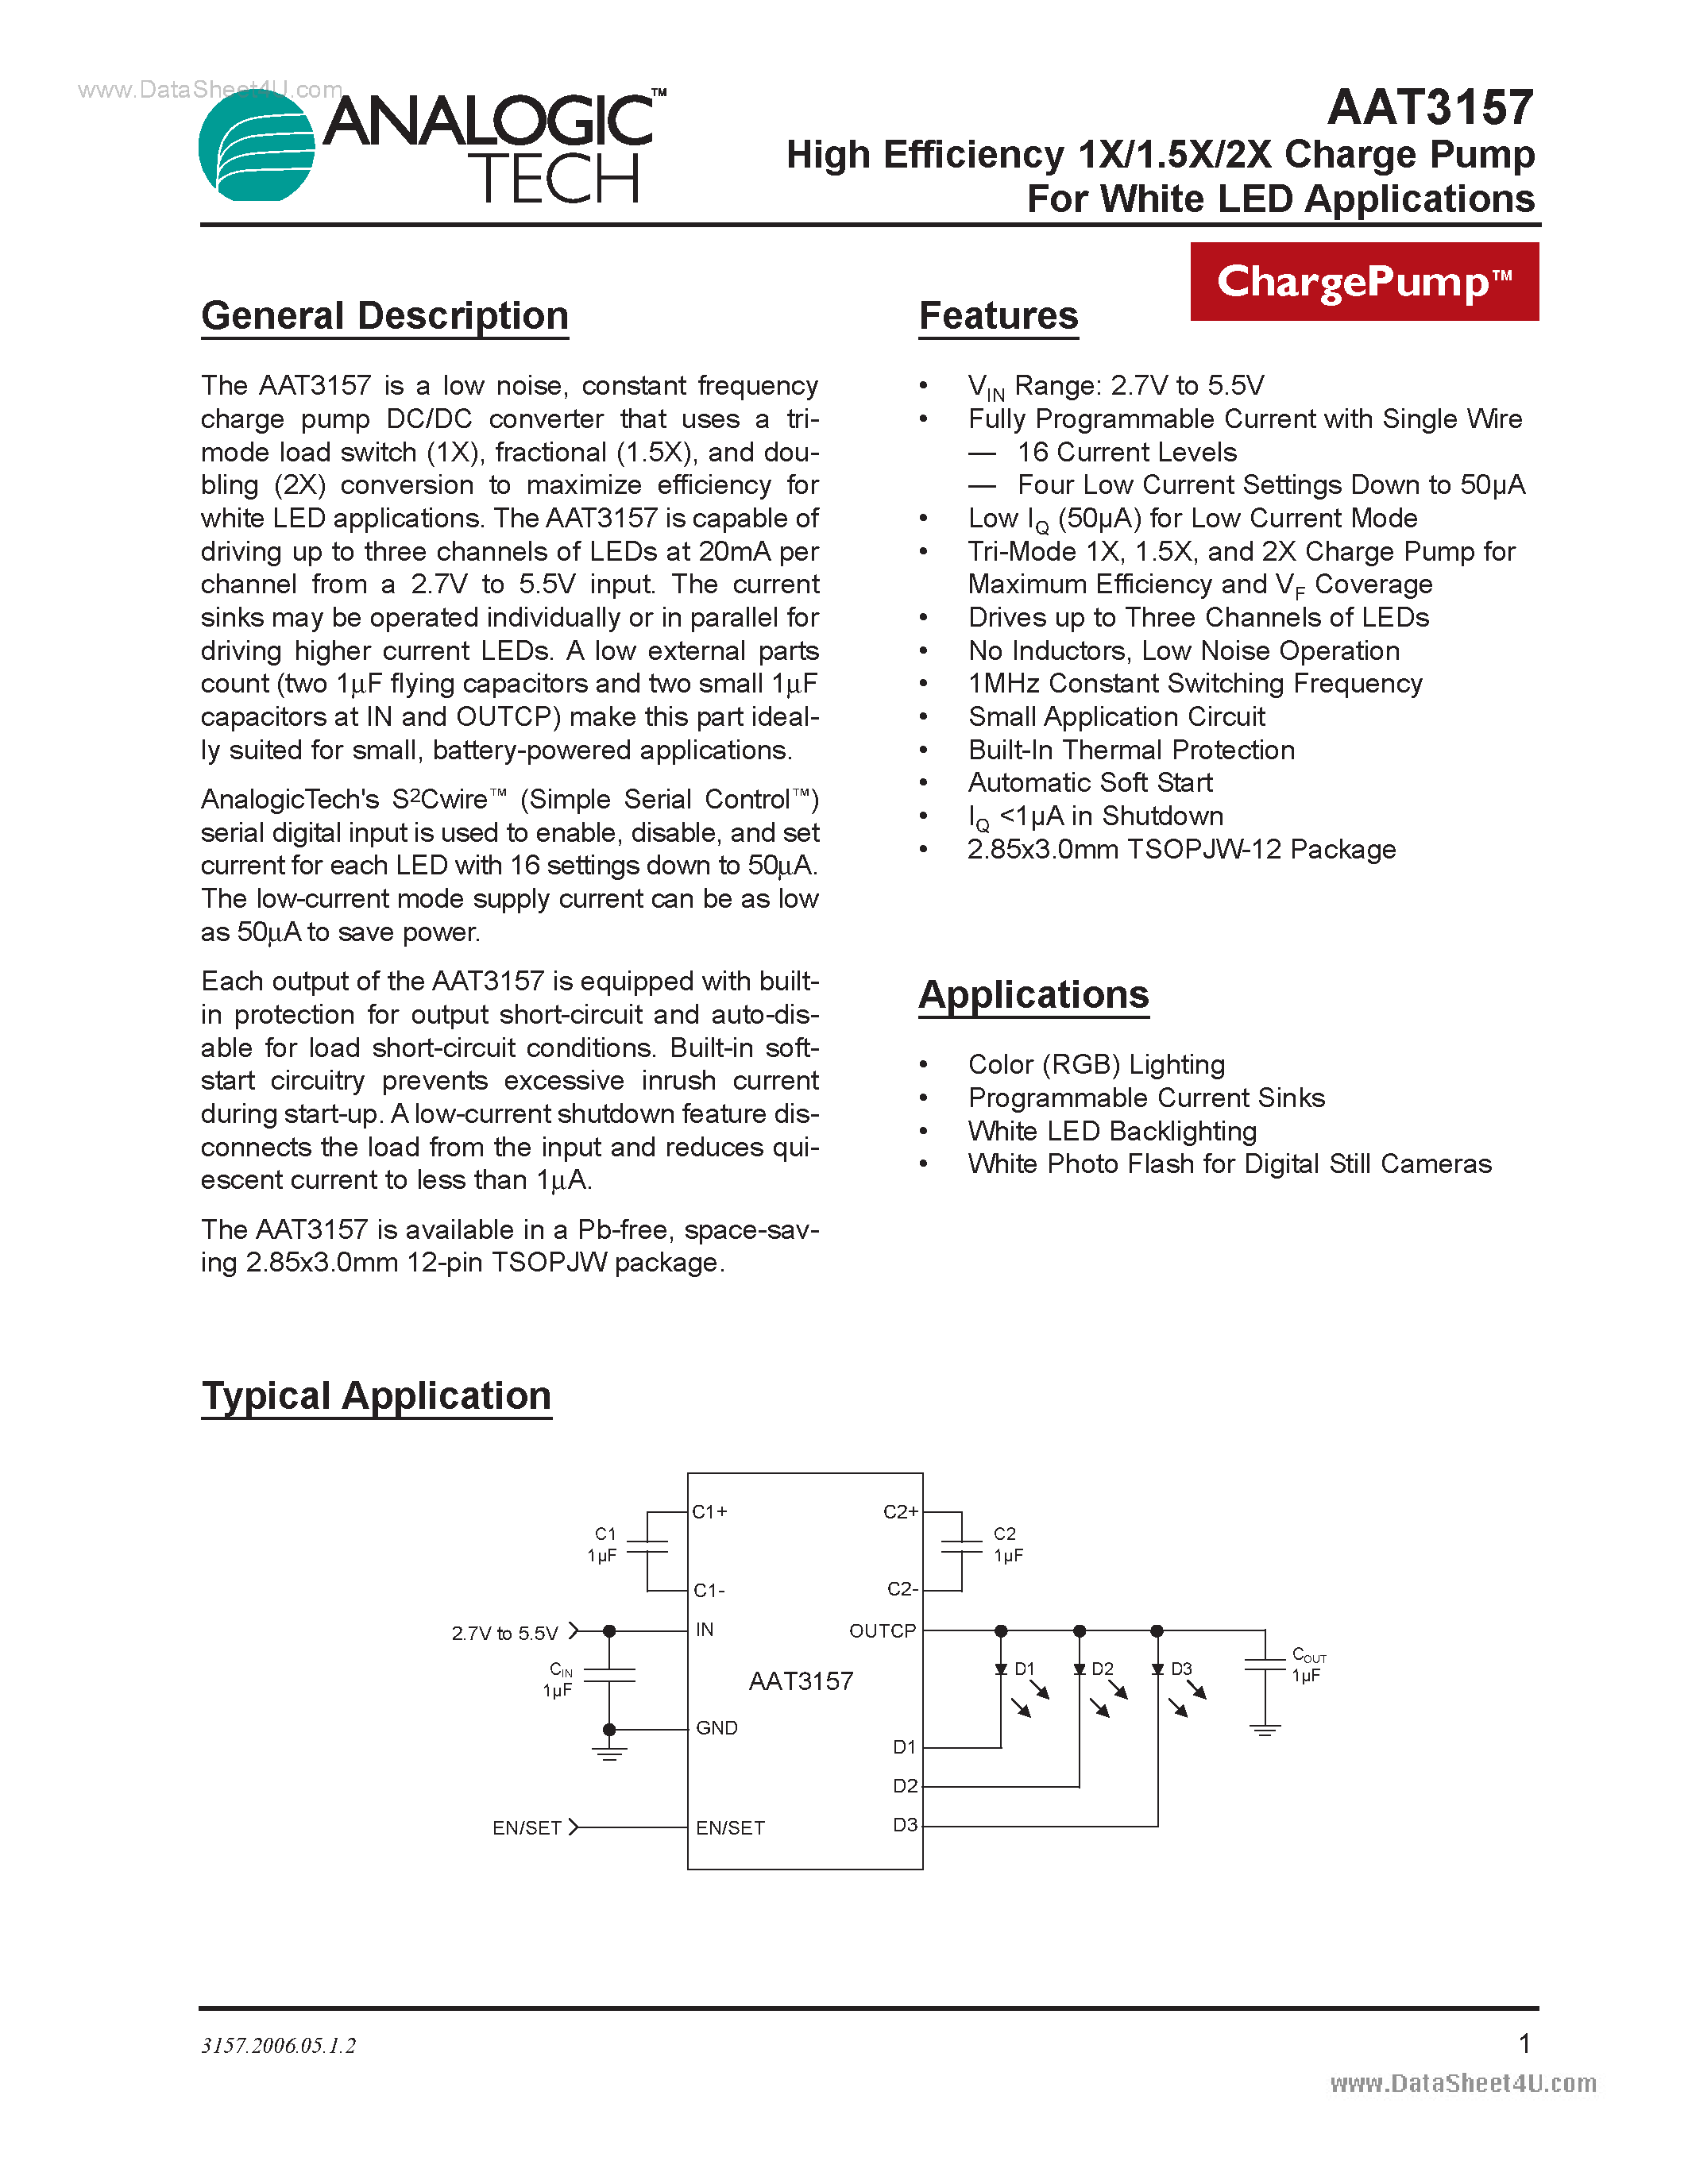 Datasheet AAT3157 - High Efficiency 1X/1.5X/2X Charge Pump page 1